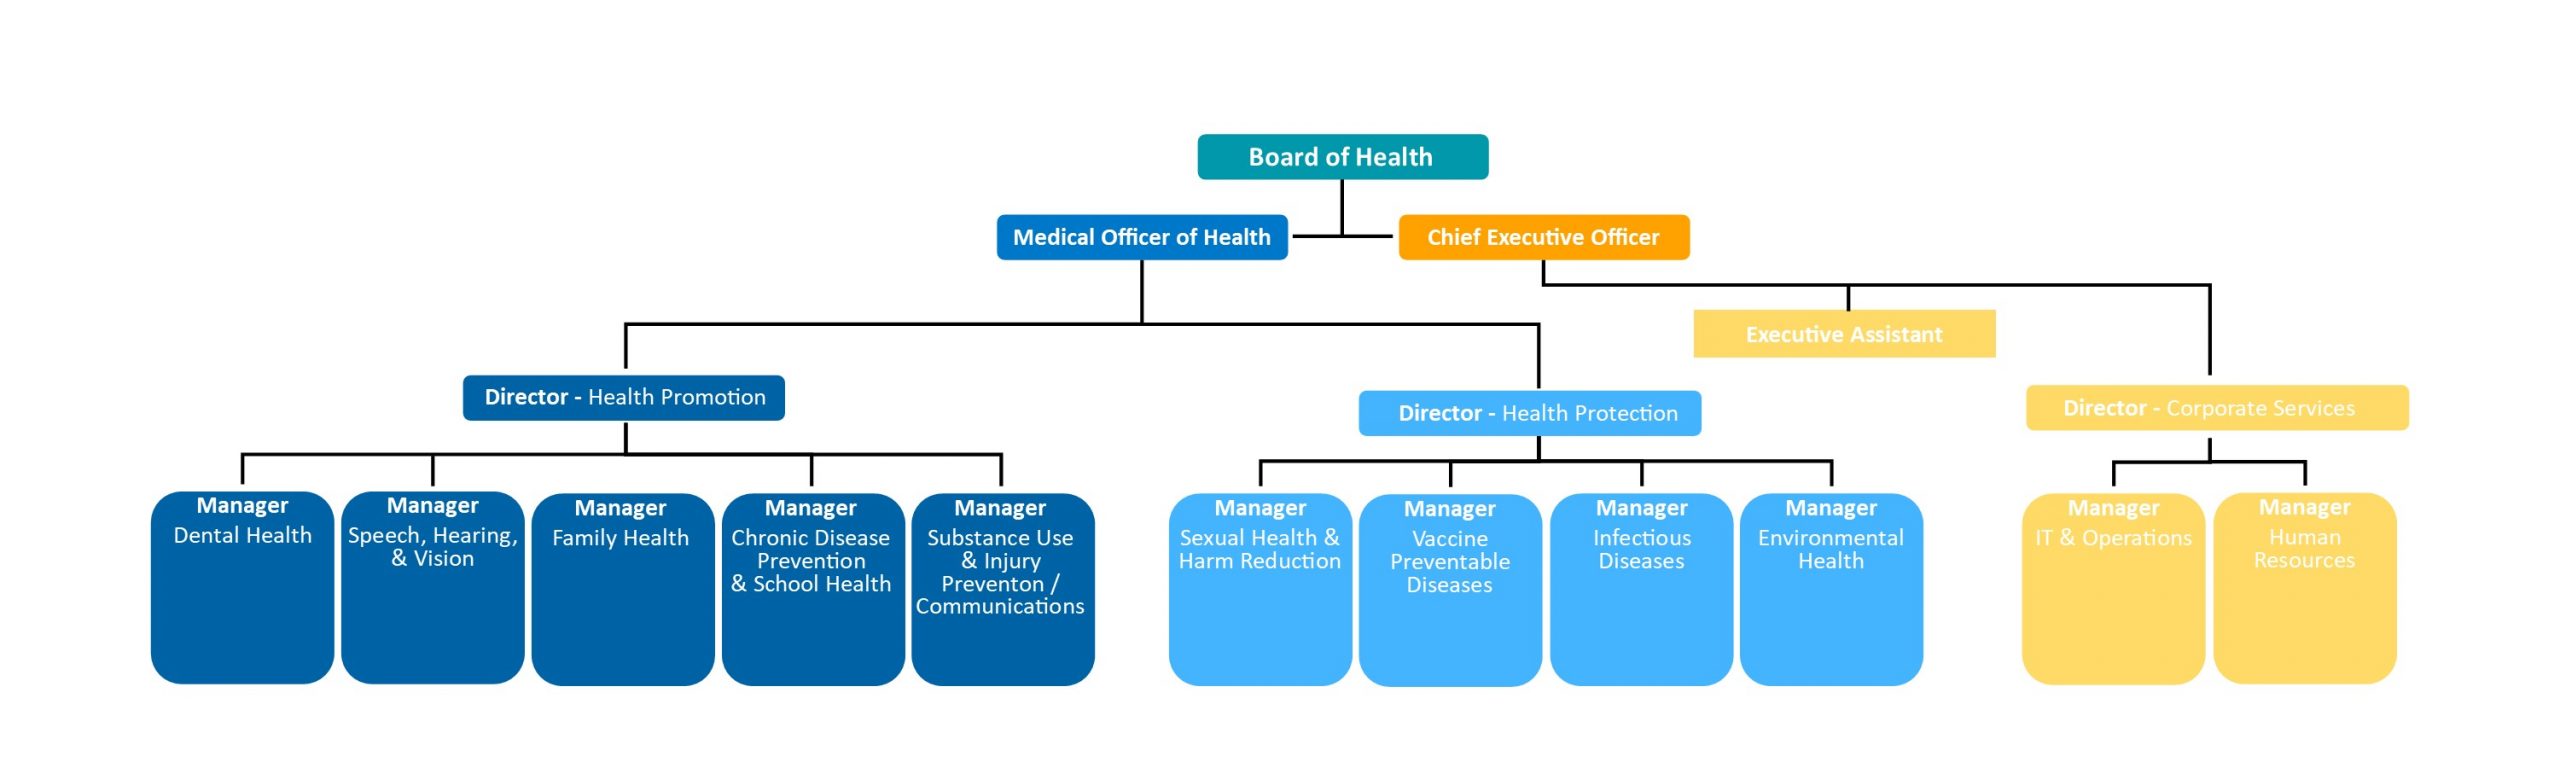 Organizational chart of the North West Health Unit. At the top, the Board of Health oversees the Medical Officer of Health and the Chief Executive Officer. The Medical Officer of Health is connected to the Director of Health Promotion, the Director of Health Protection, and the Director of Corporate Services. Under the Director of Health Promotion, there are five Manager roles: Dental Health, Speech, Hearing, & Vision, Family Health, Chronic Disease Prevention & School Health, and Substance Use & Injury Prevention/Communications. The Director of Health Protection supervises four Managers in Sexual Health & Harm Reduction, Vaccine Preventable Diseases, Infectious Diseases, and Environmental Health. Lastly, the Director of Corporate Services oversees the Manager of IT & Operations and the Manager of Human Resources. An Executive Assistant position supports the Chief Executive Officer.